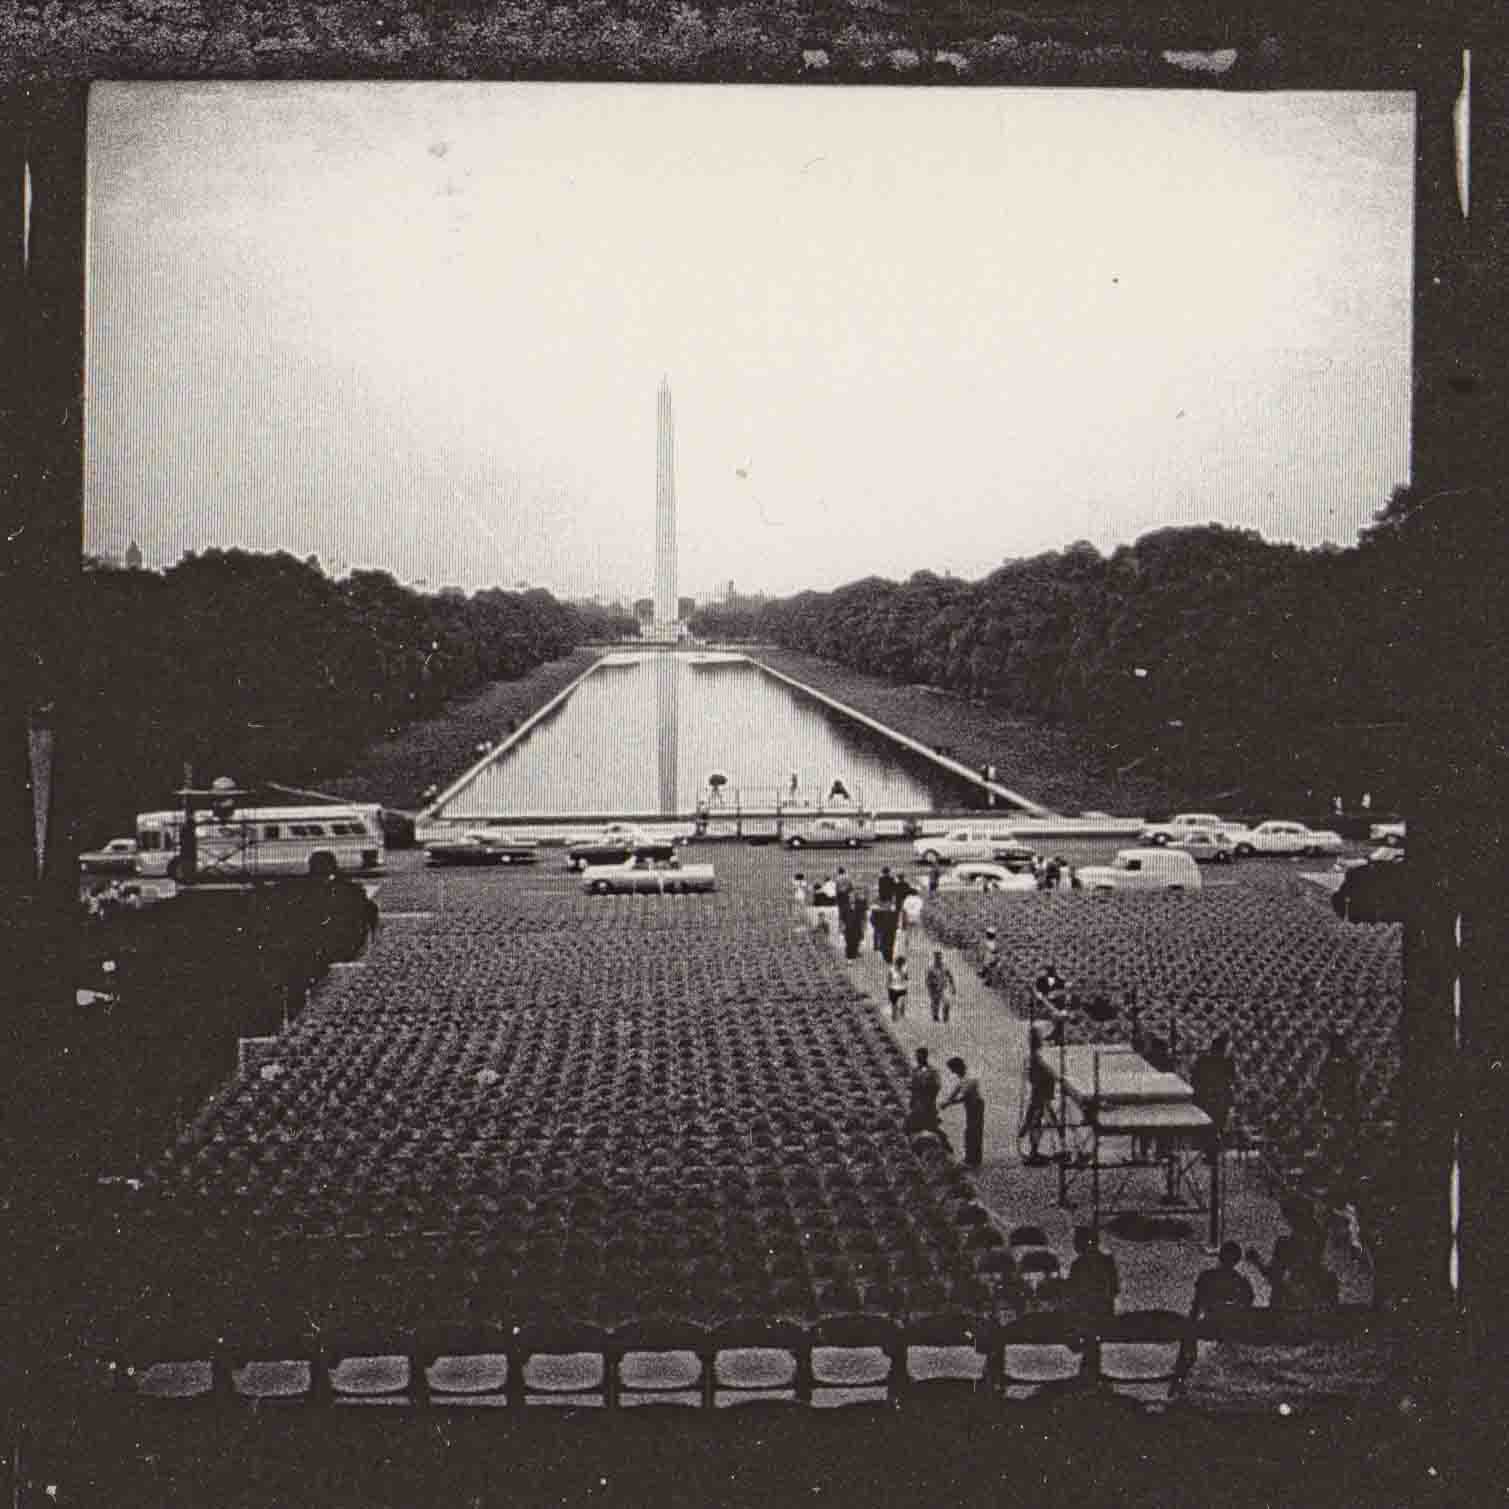 Seating for the March on Washington (Photo by Bob Adamenko)